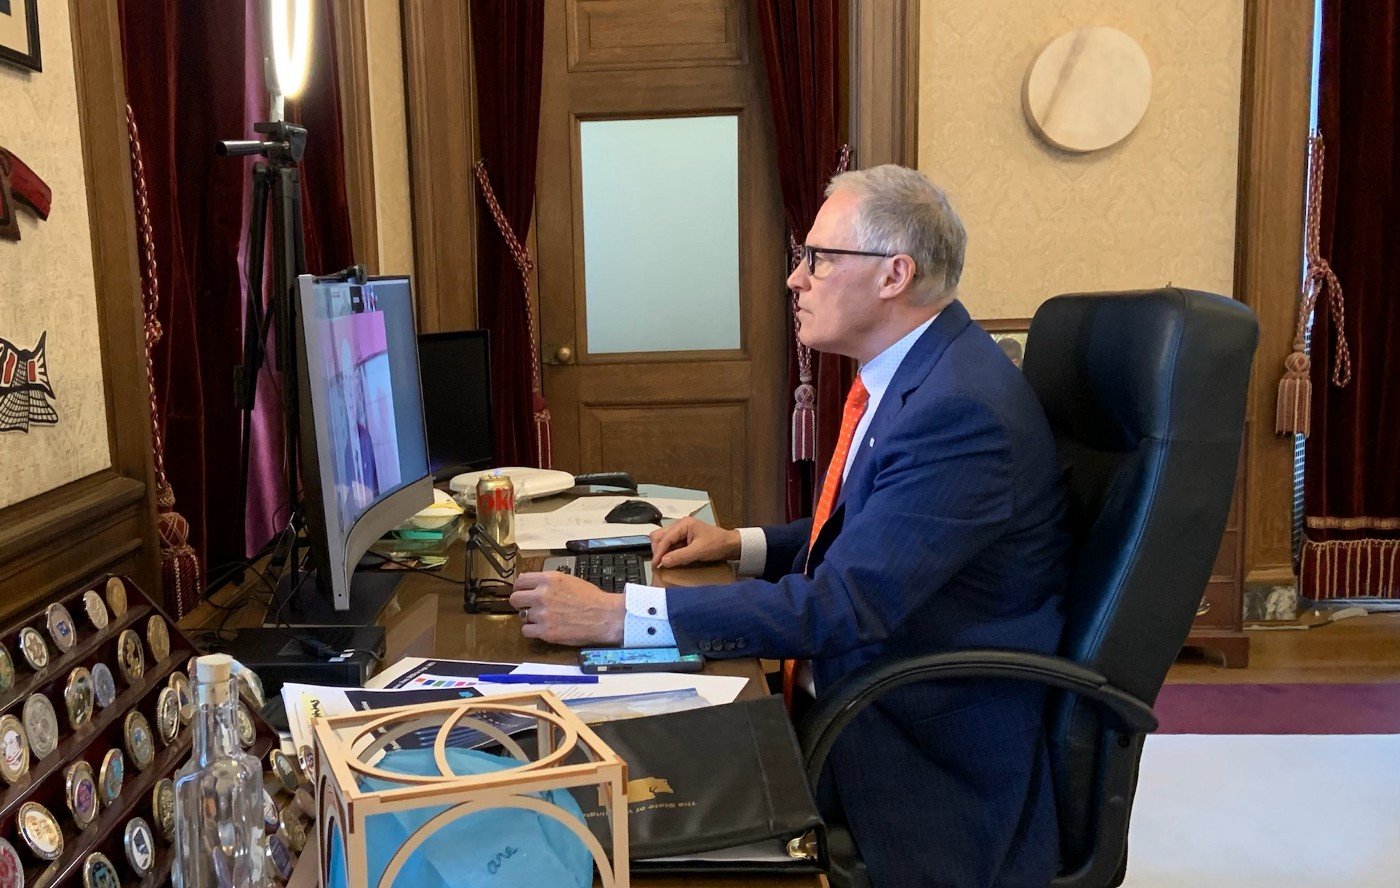 Gov. Jay Inslee joined other state and city leaders in testifying to the Select Subcommittee on the Coronavirus Crisis about their response to the omicron variant.